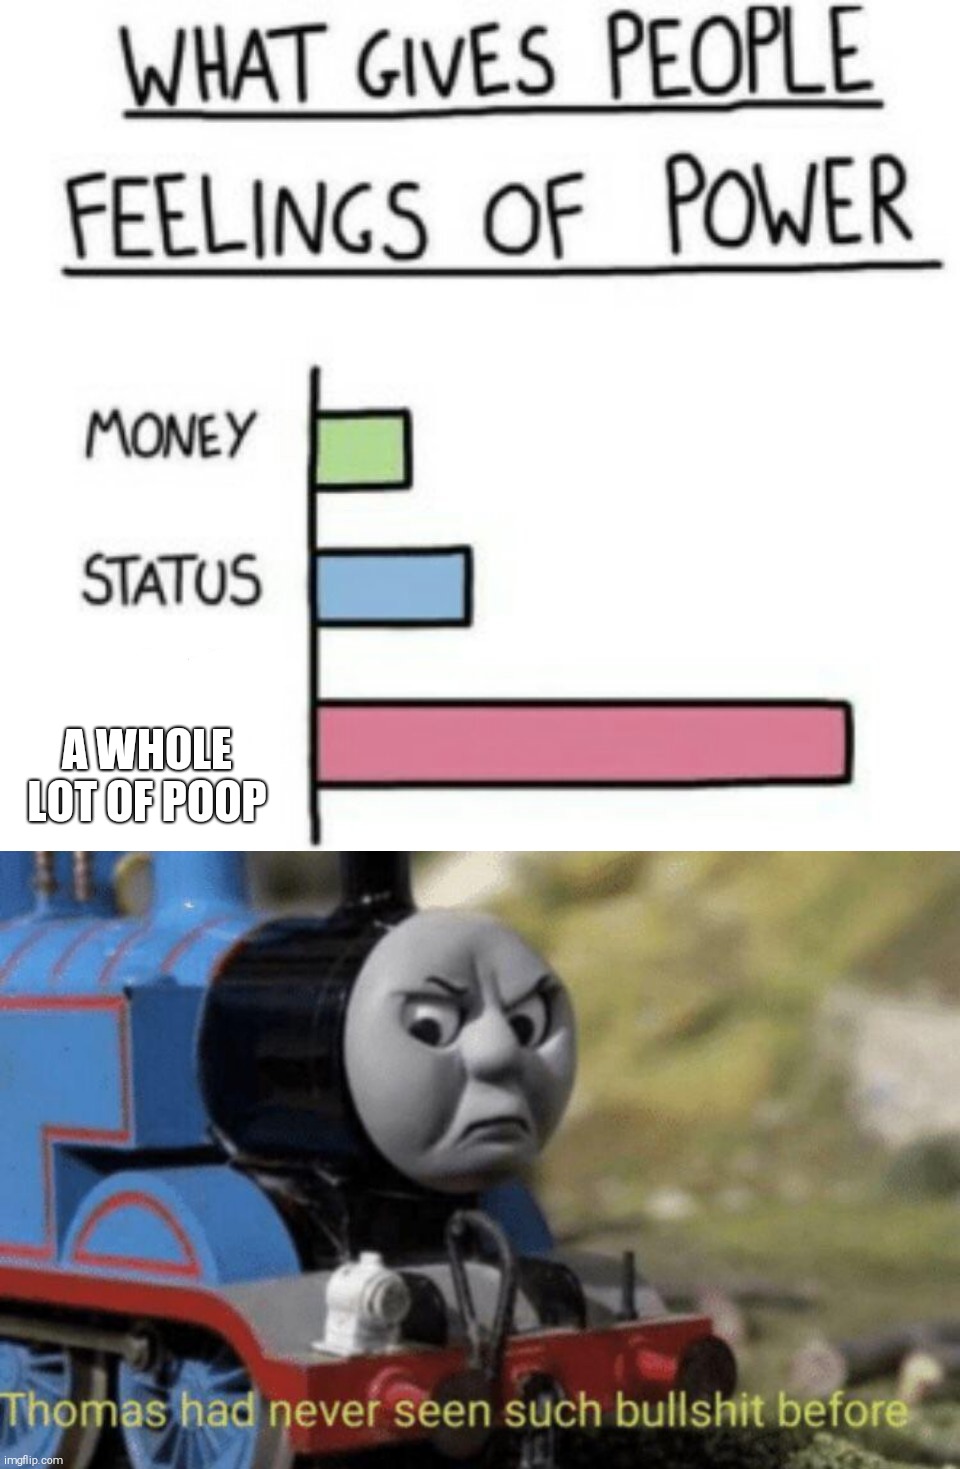 A WHOLE LOT OF POOP | image tagged in what gives people feelings of power,thomas had never seen such bullshit before,poop,bullshit | made w/ Imgflip meme maker